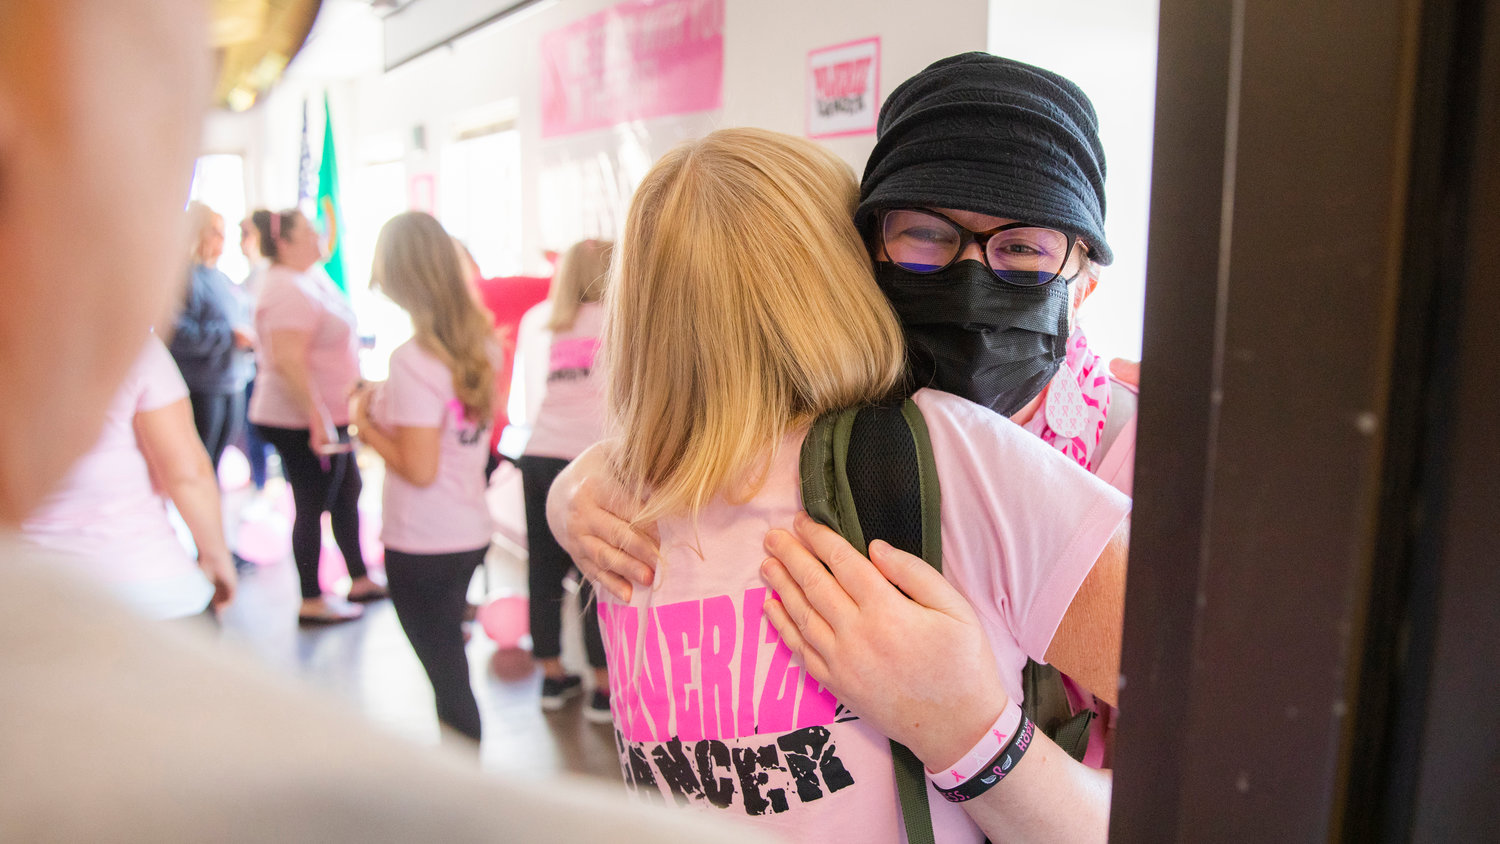 Lori Pulver receives an embrace Friday morning in Chehalis. Pulver has been in an ongoing fight with breast cancer. The phrase “Pulver-ize Cancer” has been displayed in windows outside the Lewis County Courthouse this month.